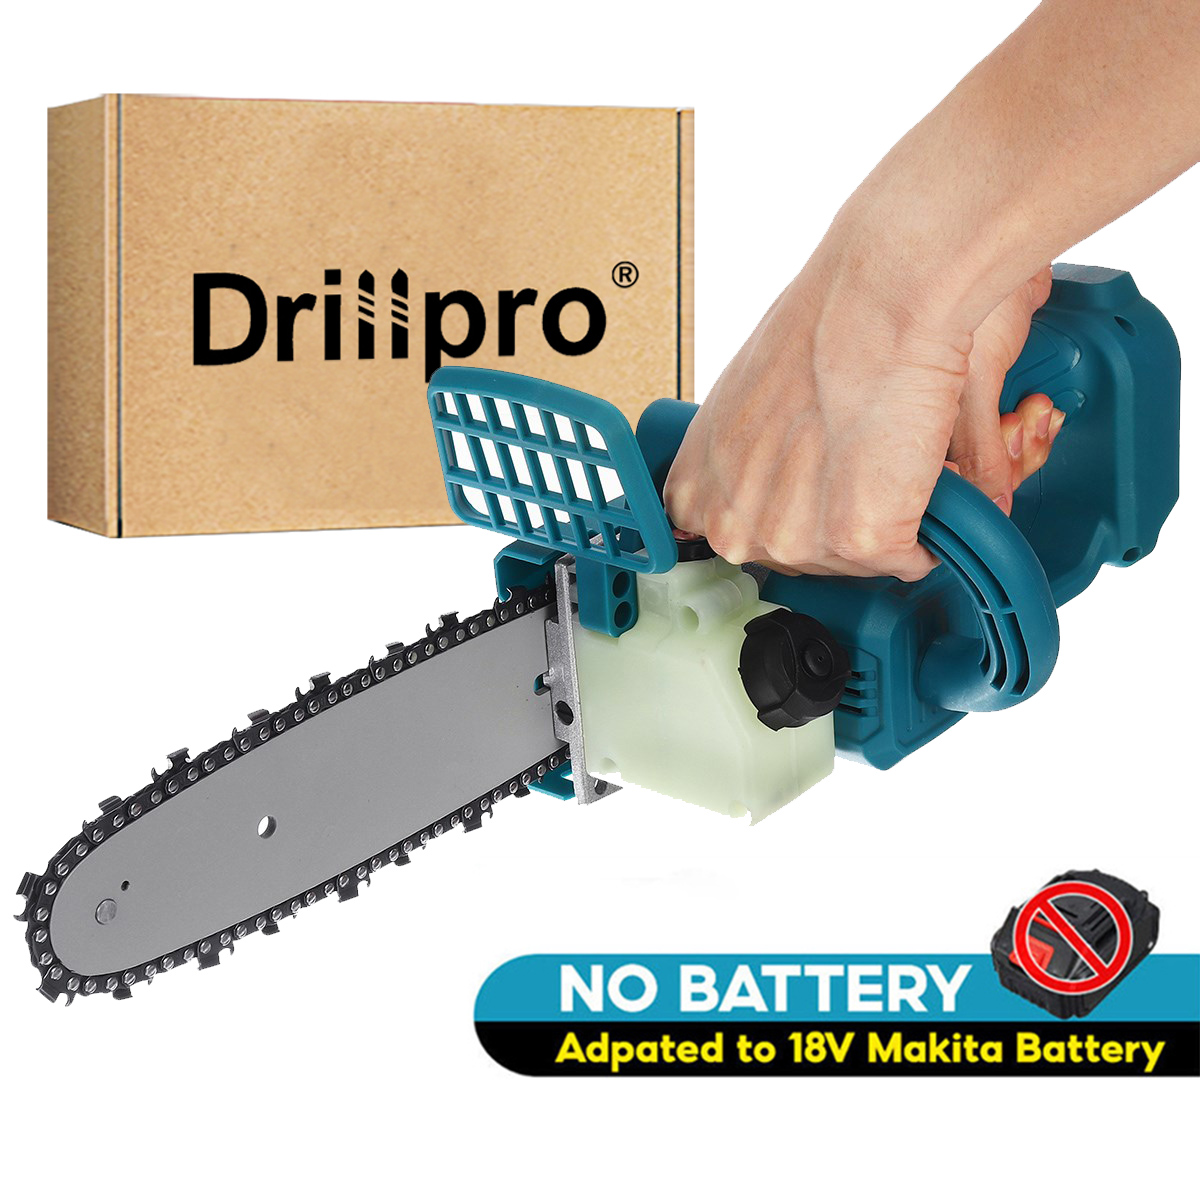 Drillpro-8-Inch-Woodworking-Electric-Chain-Saw-Portable-Wood-Cutting-Pruning-Tool-Without-Battery-1743313-2